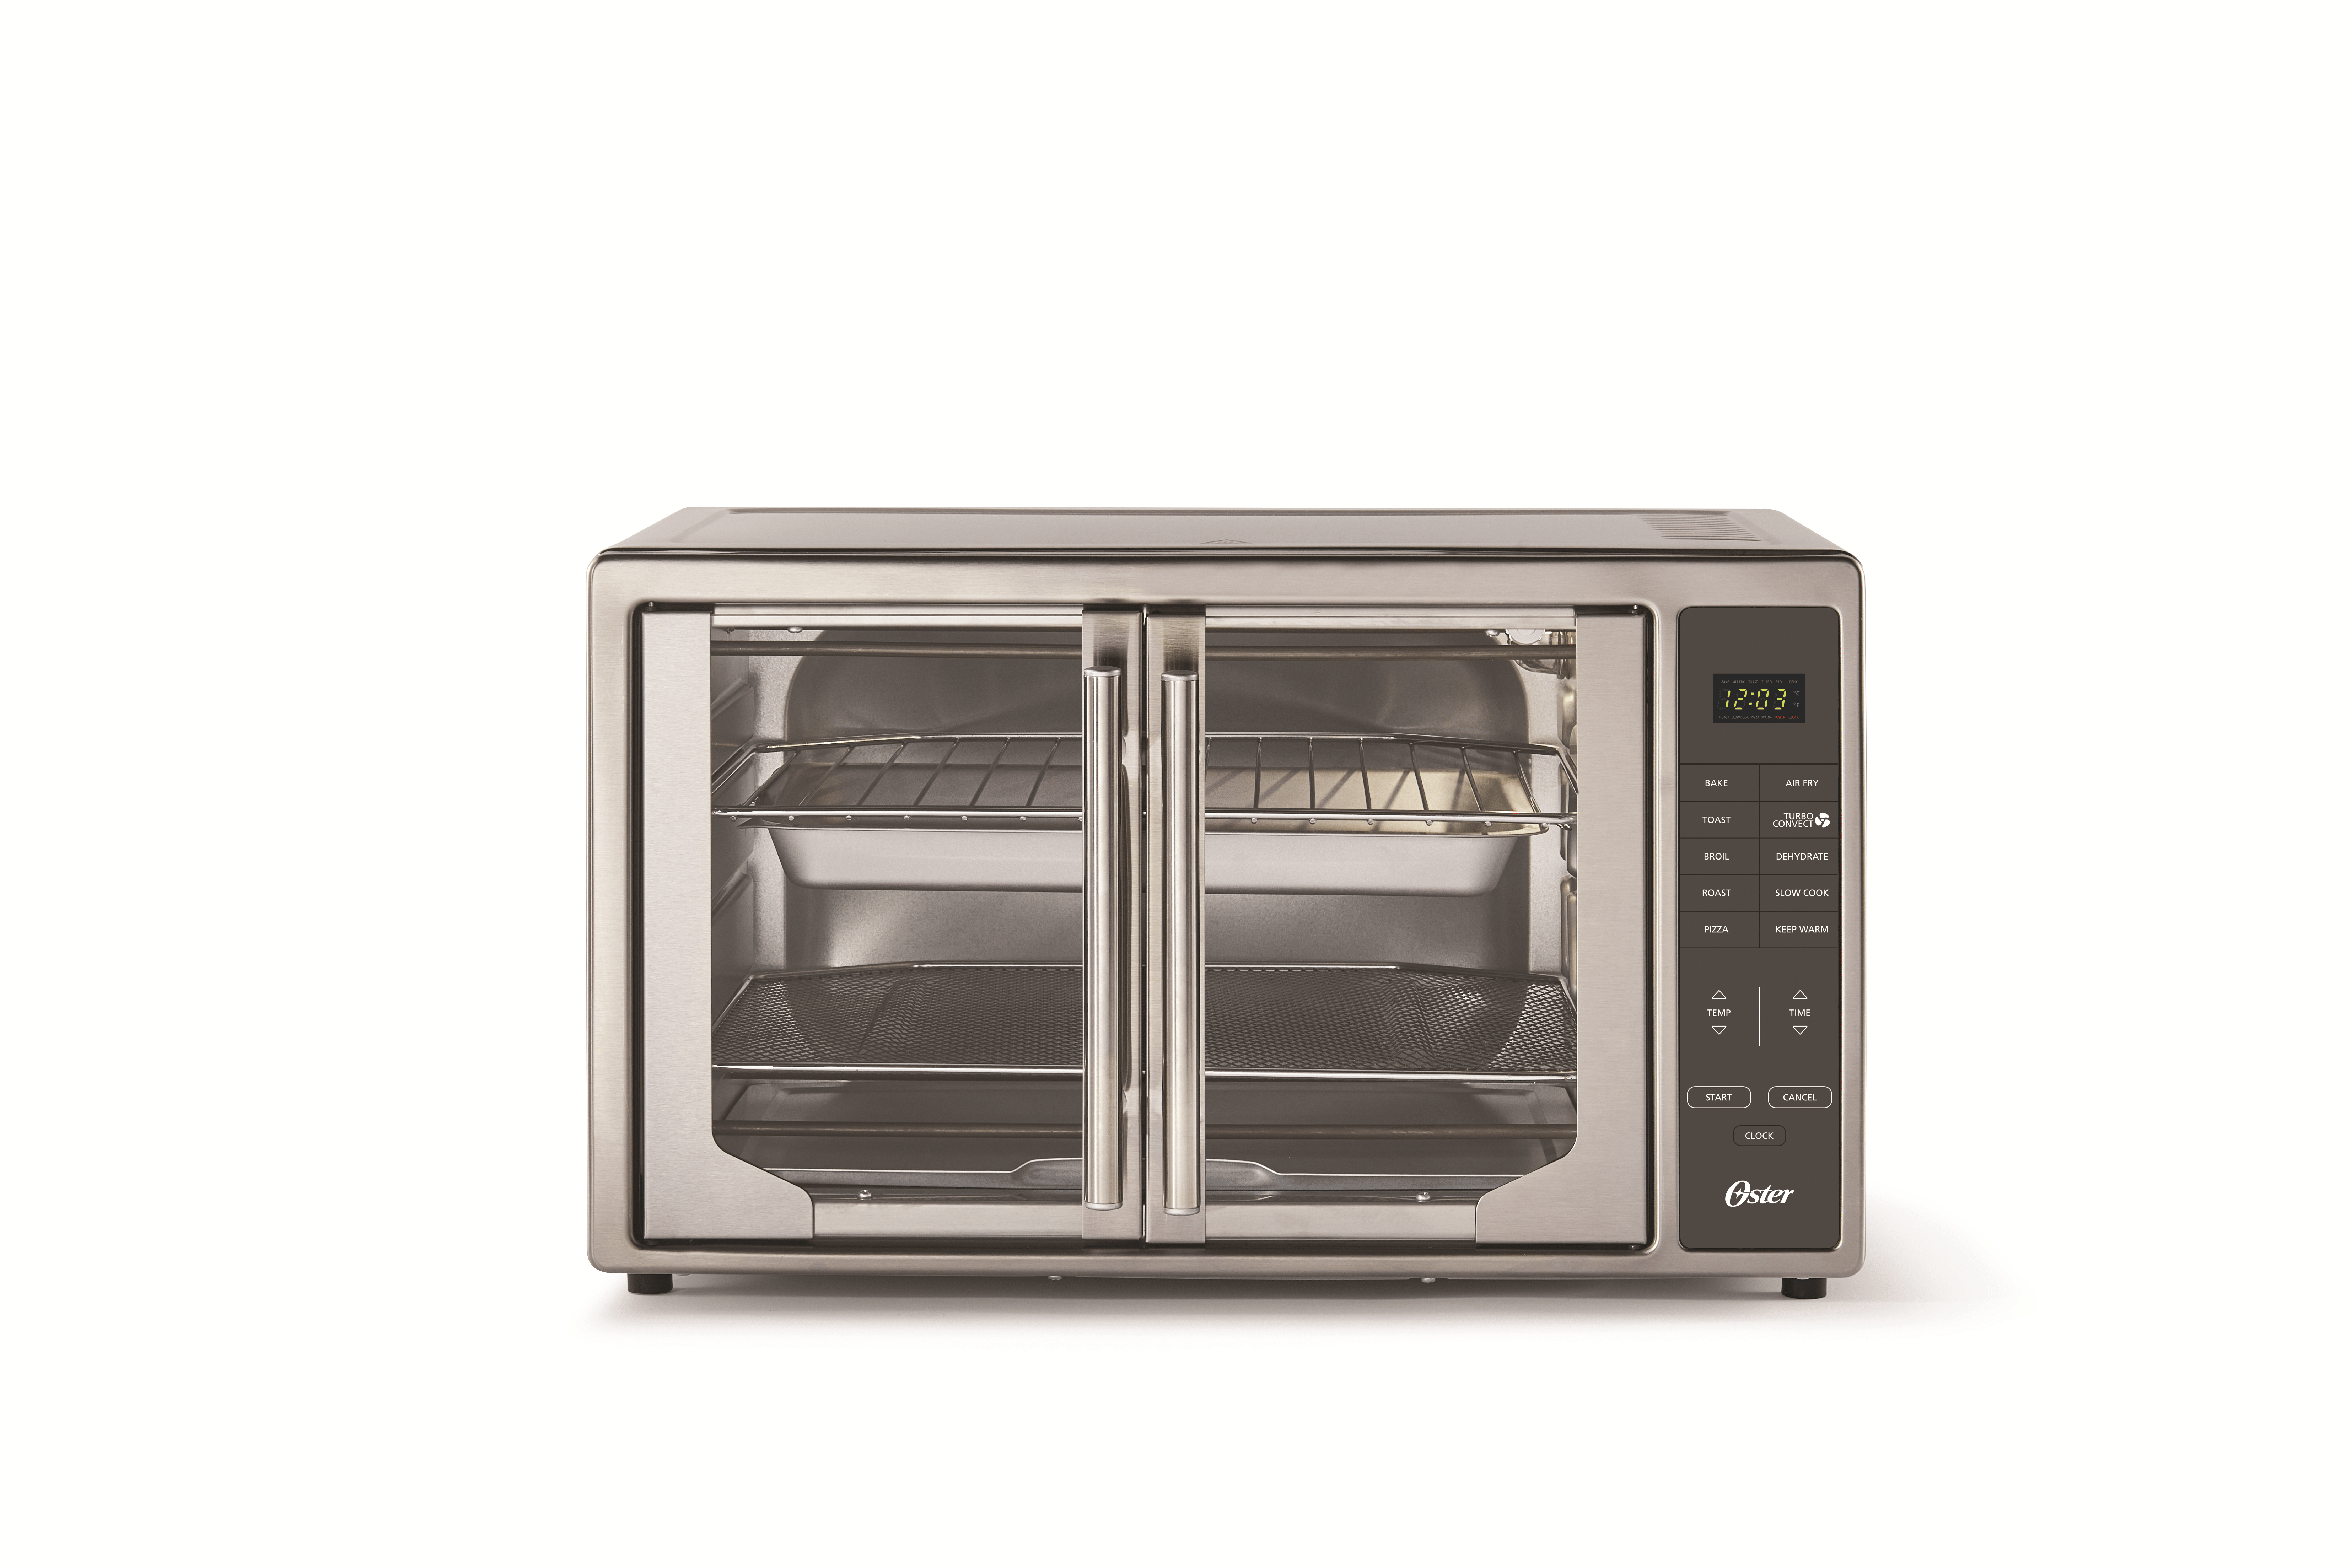 https://www.oster.ca/on/demandware.static/-/Sites-master-catalog/default/dwe052d25a/images/Oster/ca-oster/2142065-SAP-oster-digital-oven-silver-light-on-door-closed-straight-on-1-min.png